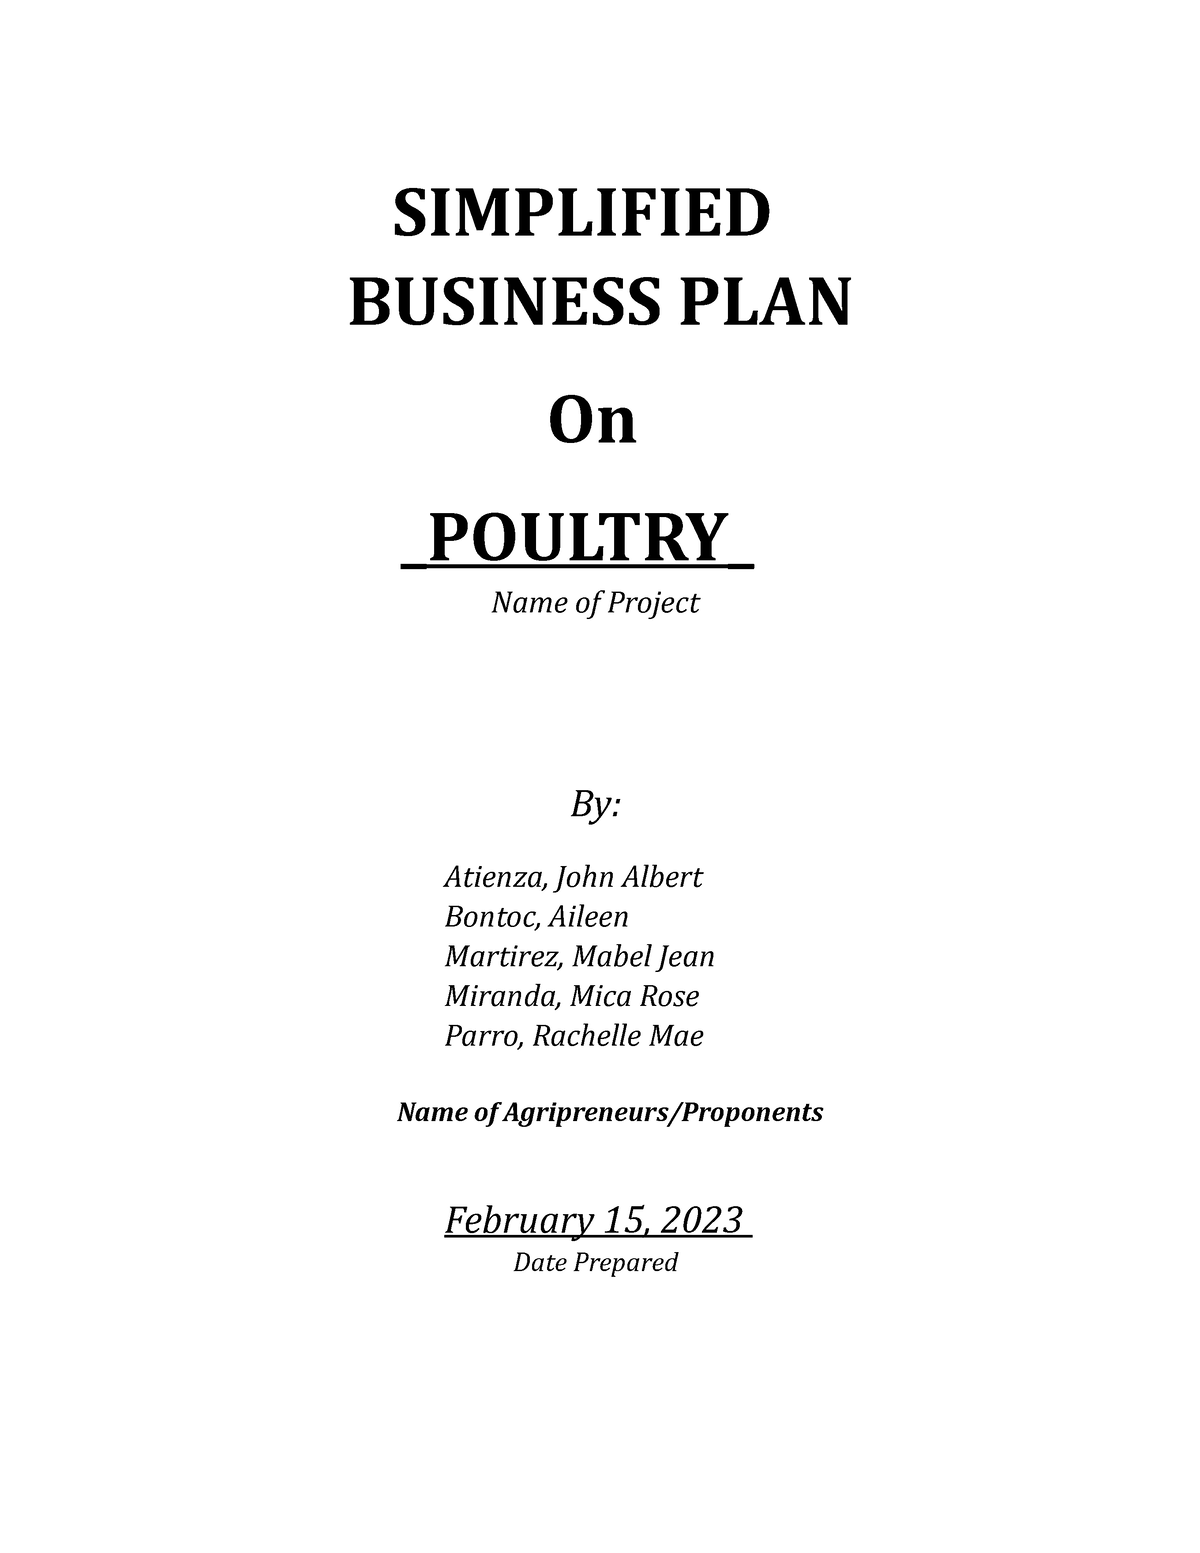 business plan on broiler production